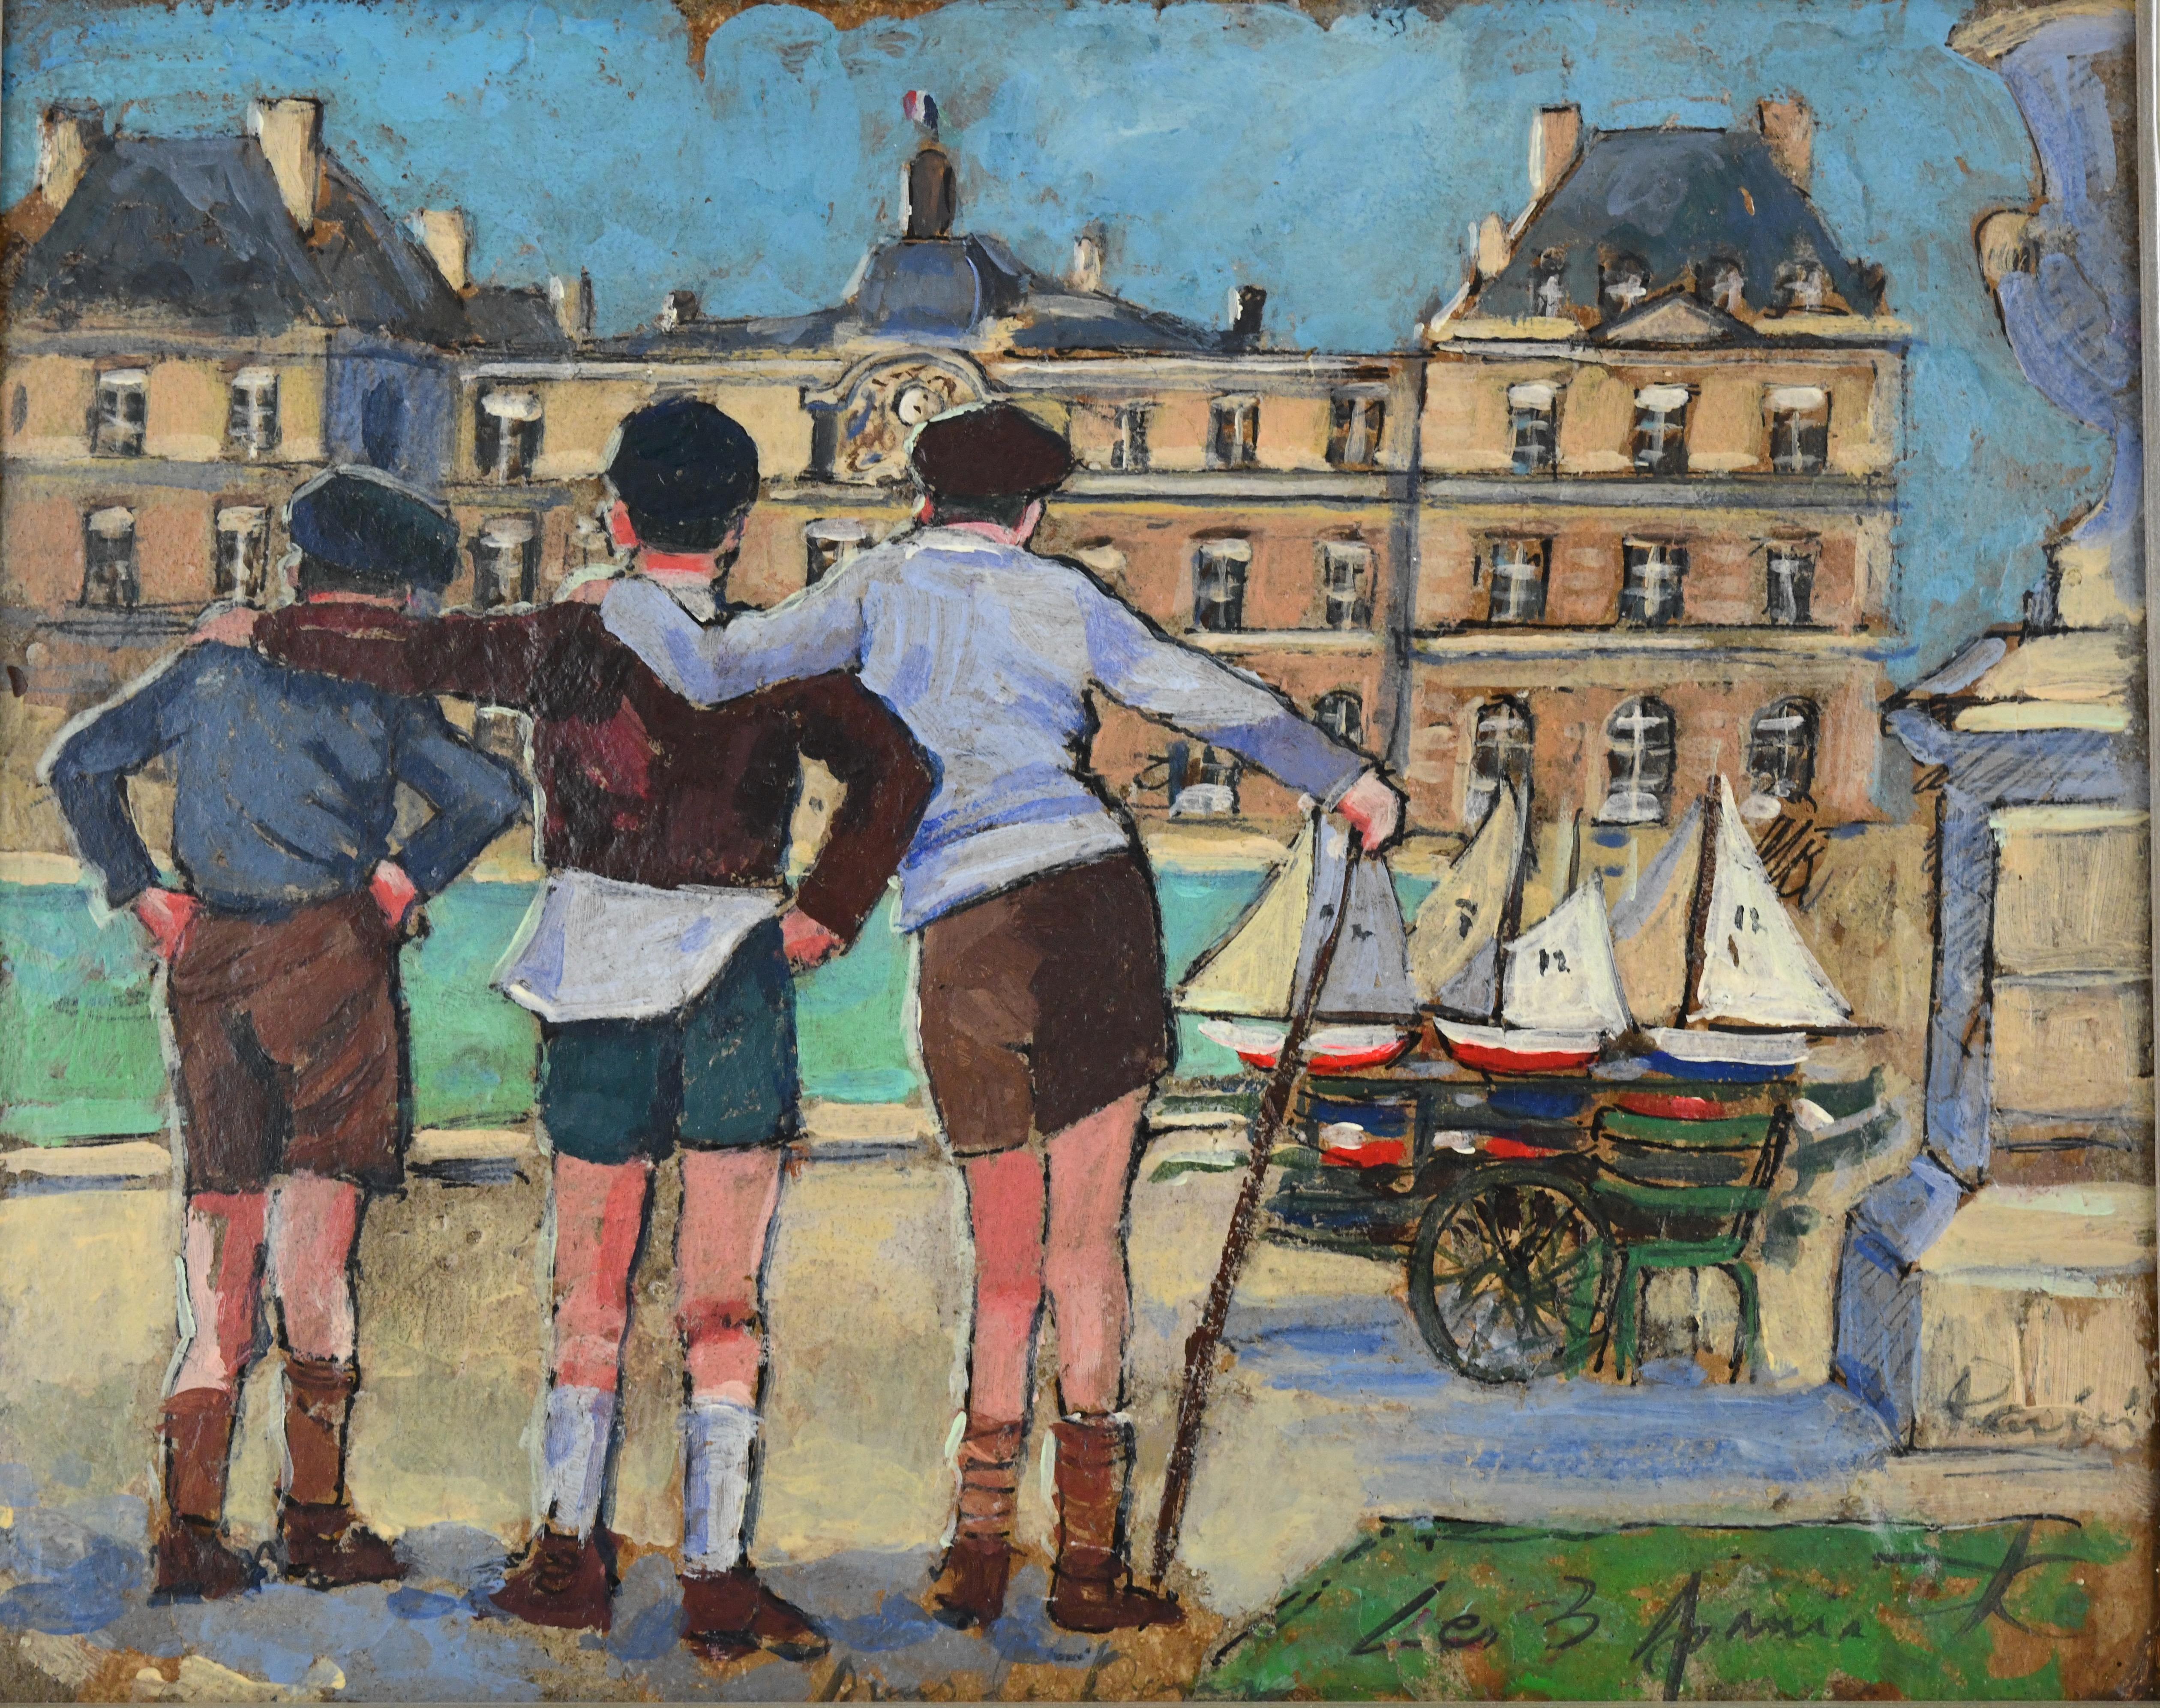 Art Deco painting 3 friends with boats at Palais du Luxembourg Paris by Christiane Caillotin
Title: Les 3 amis. Monogrammed. France 1940.
Acrylic paint on board. 
Framed. 
	
Christiane CAILLOTIN 
French 20th century painter, born in Coye la Forêt